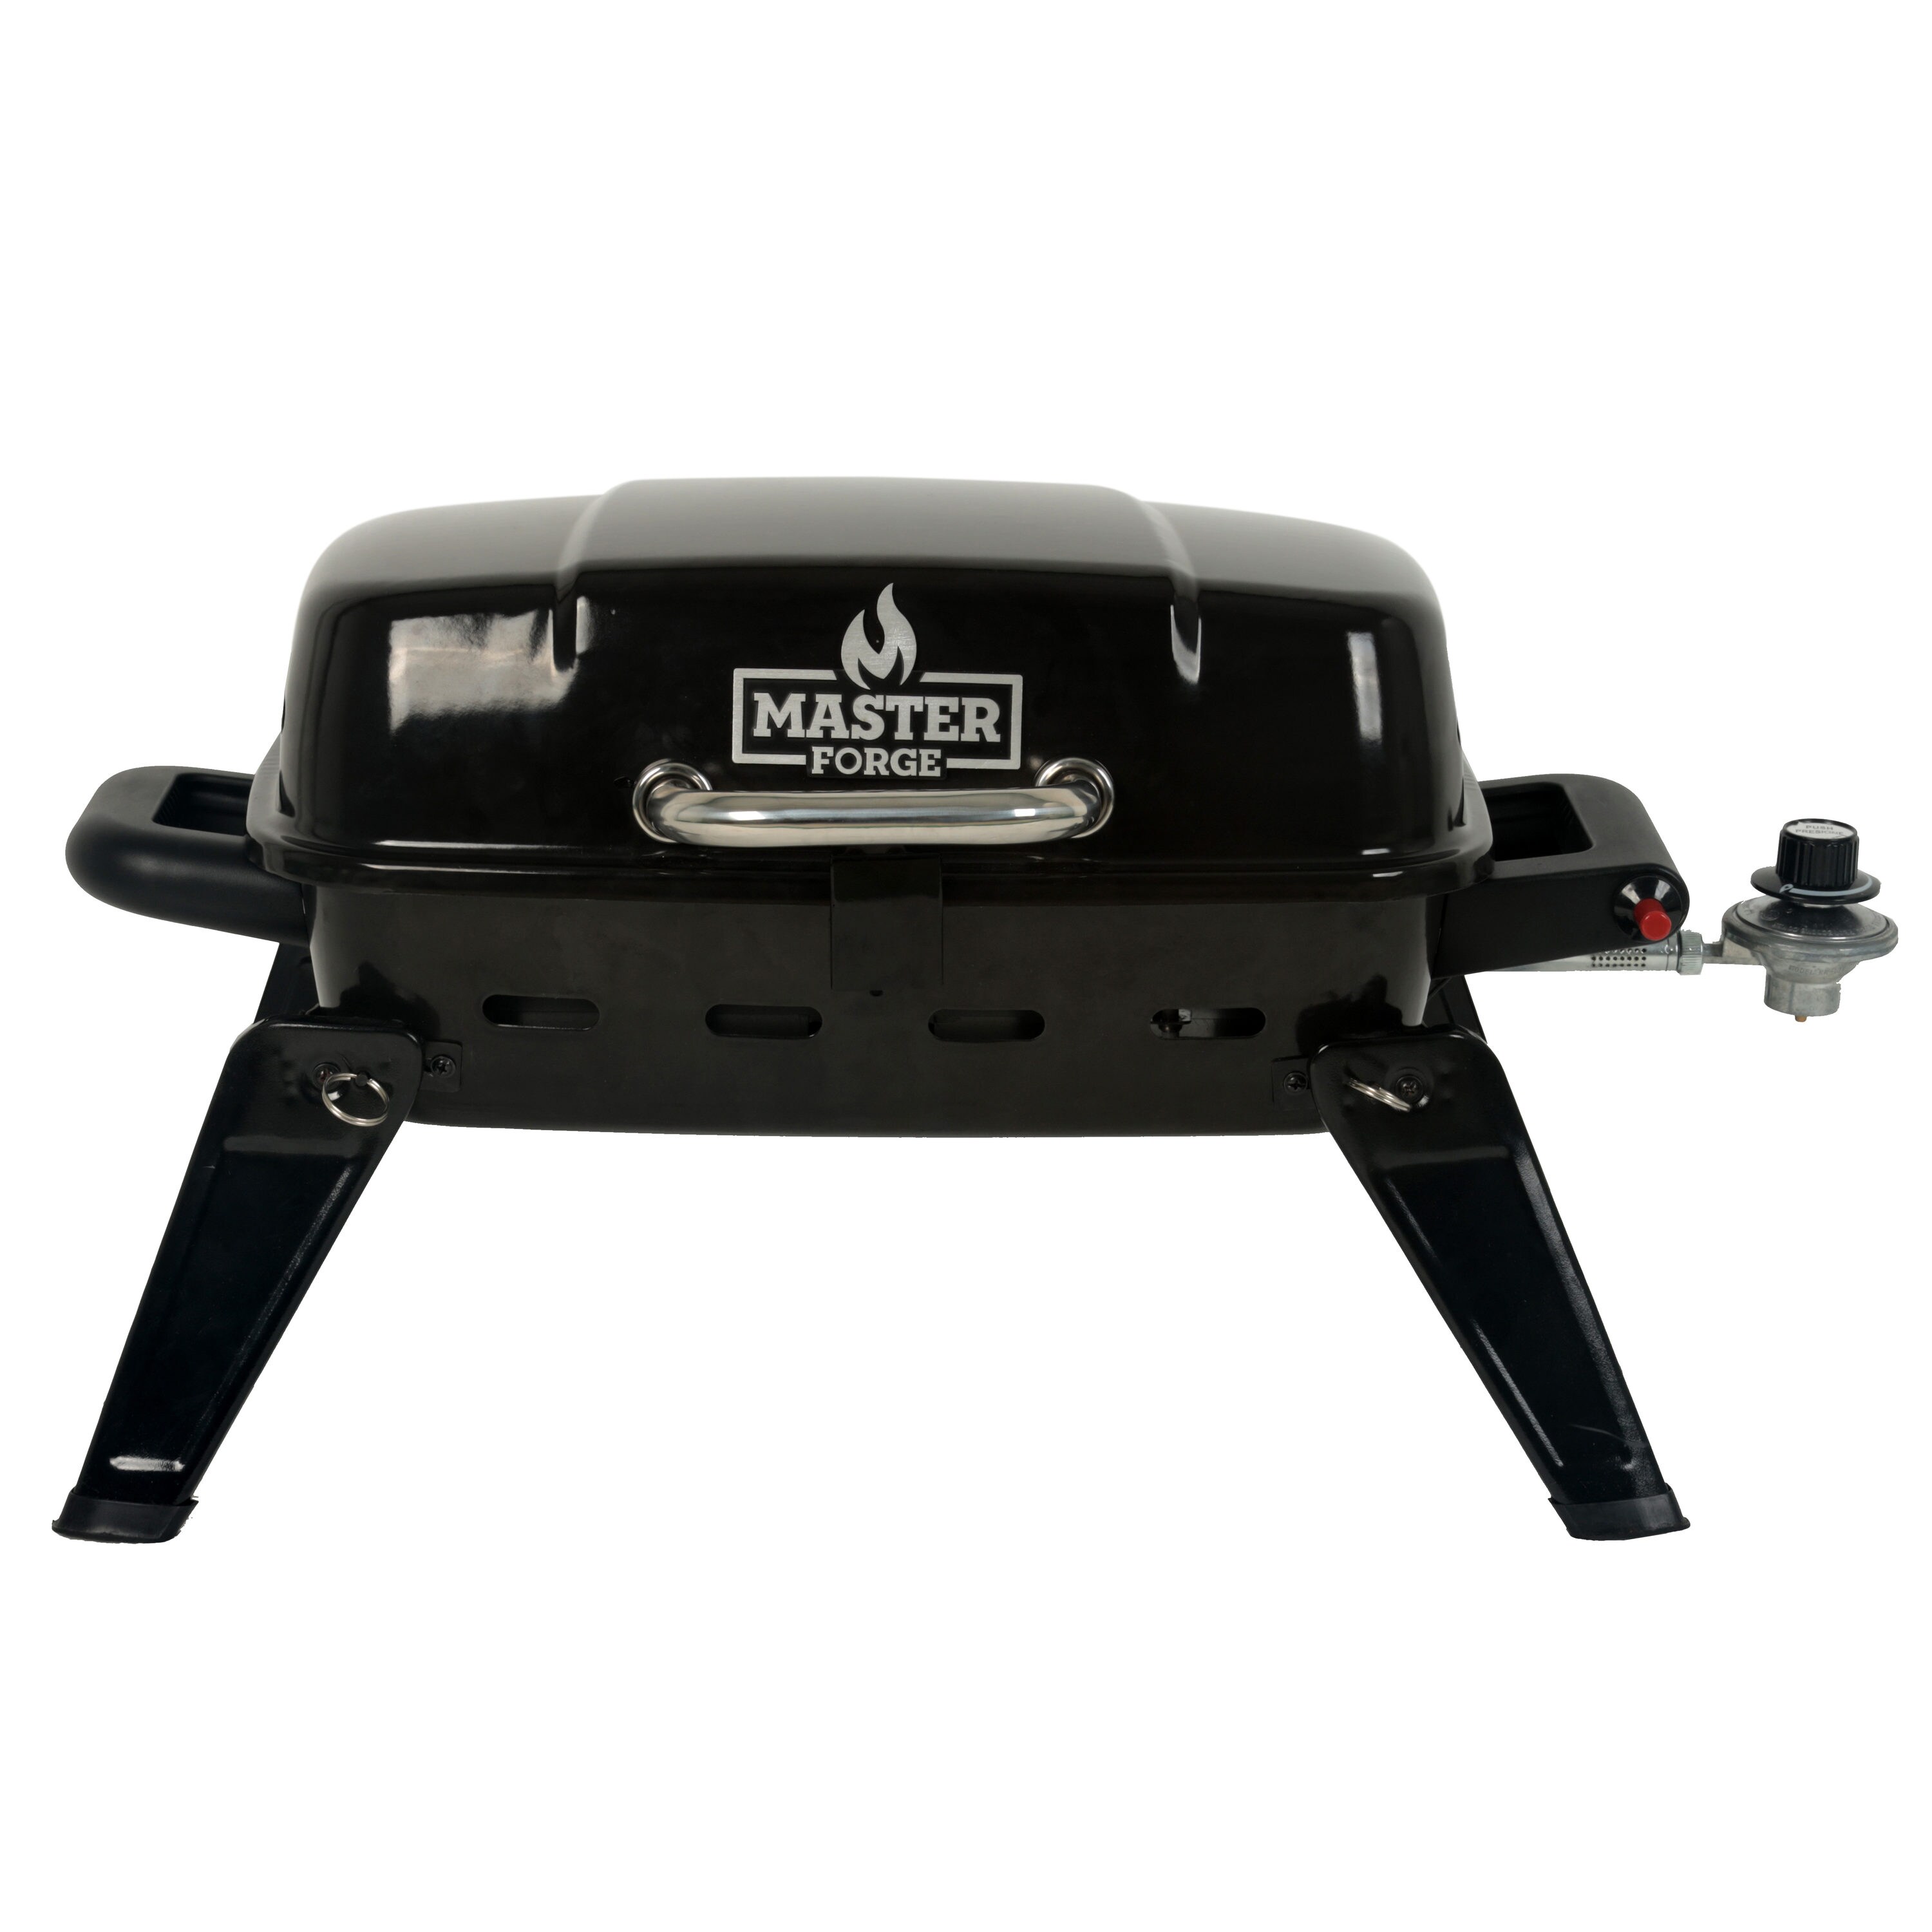 Portable Tabletop Gas Grill - Innovative Grilling Tools